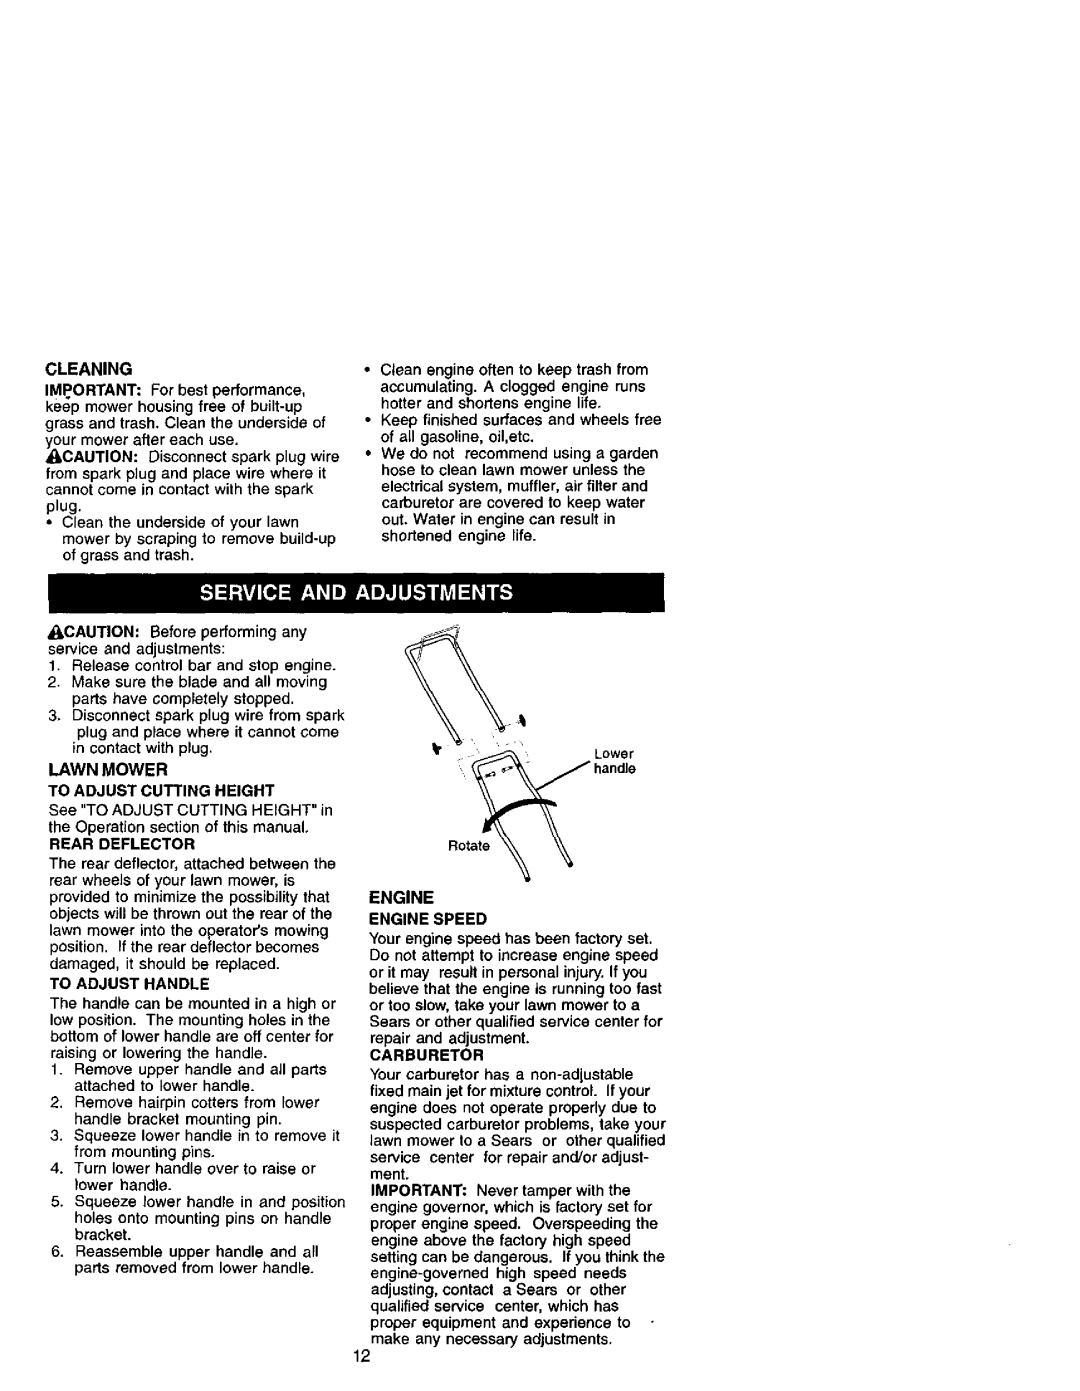 Craftsman 944.36153 owner manual Cleaning 